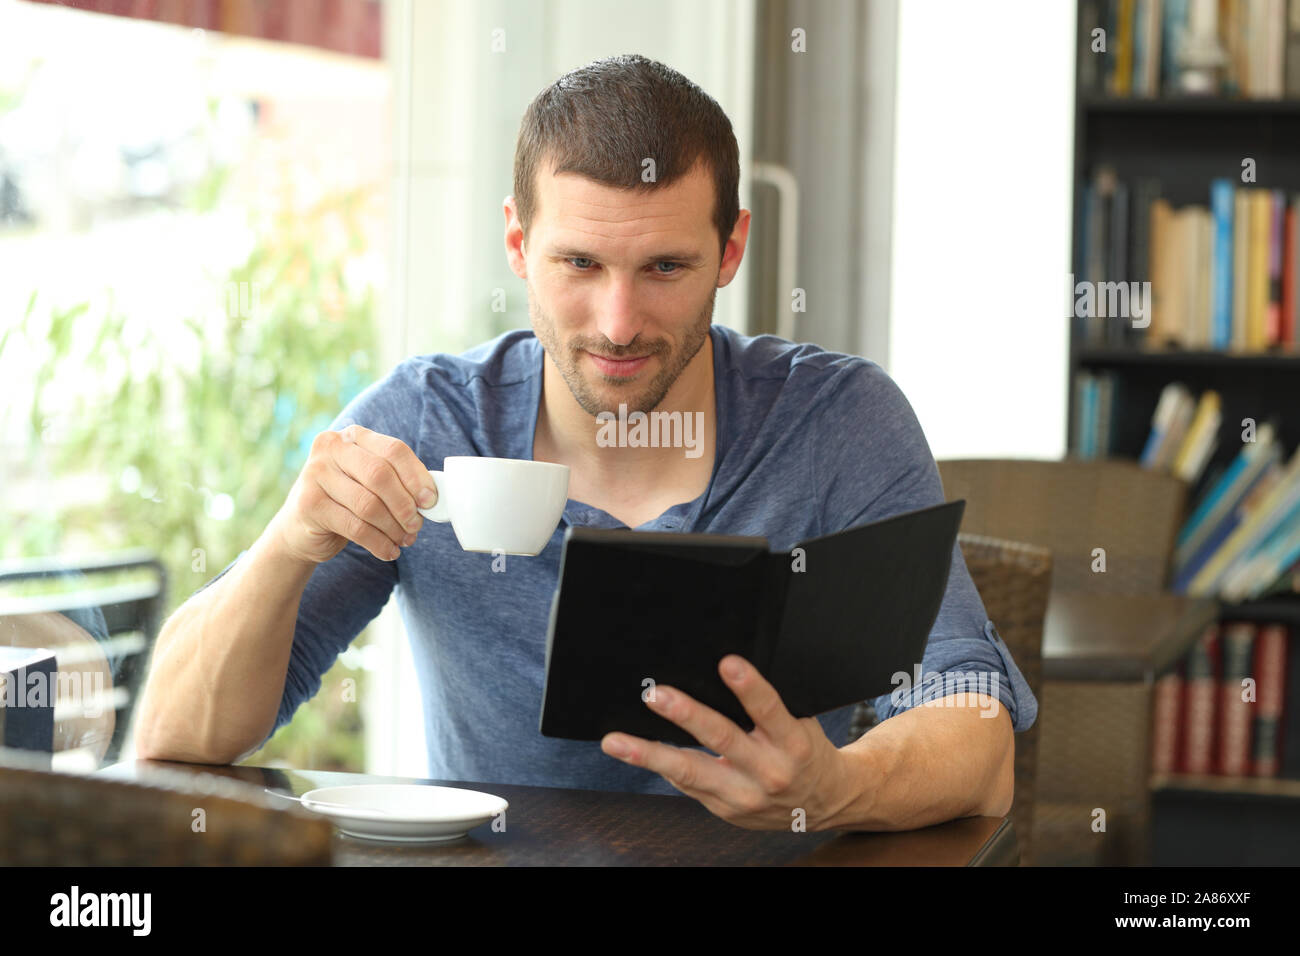 Front view portrait of a serious man reading an ebook sitting in a coffee shop Stock Photo